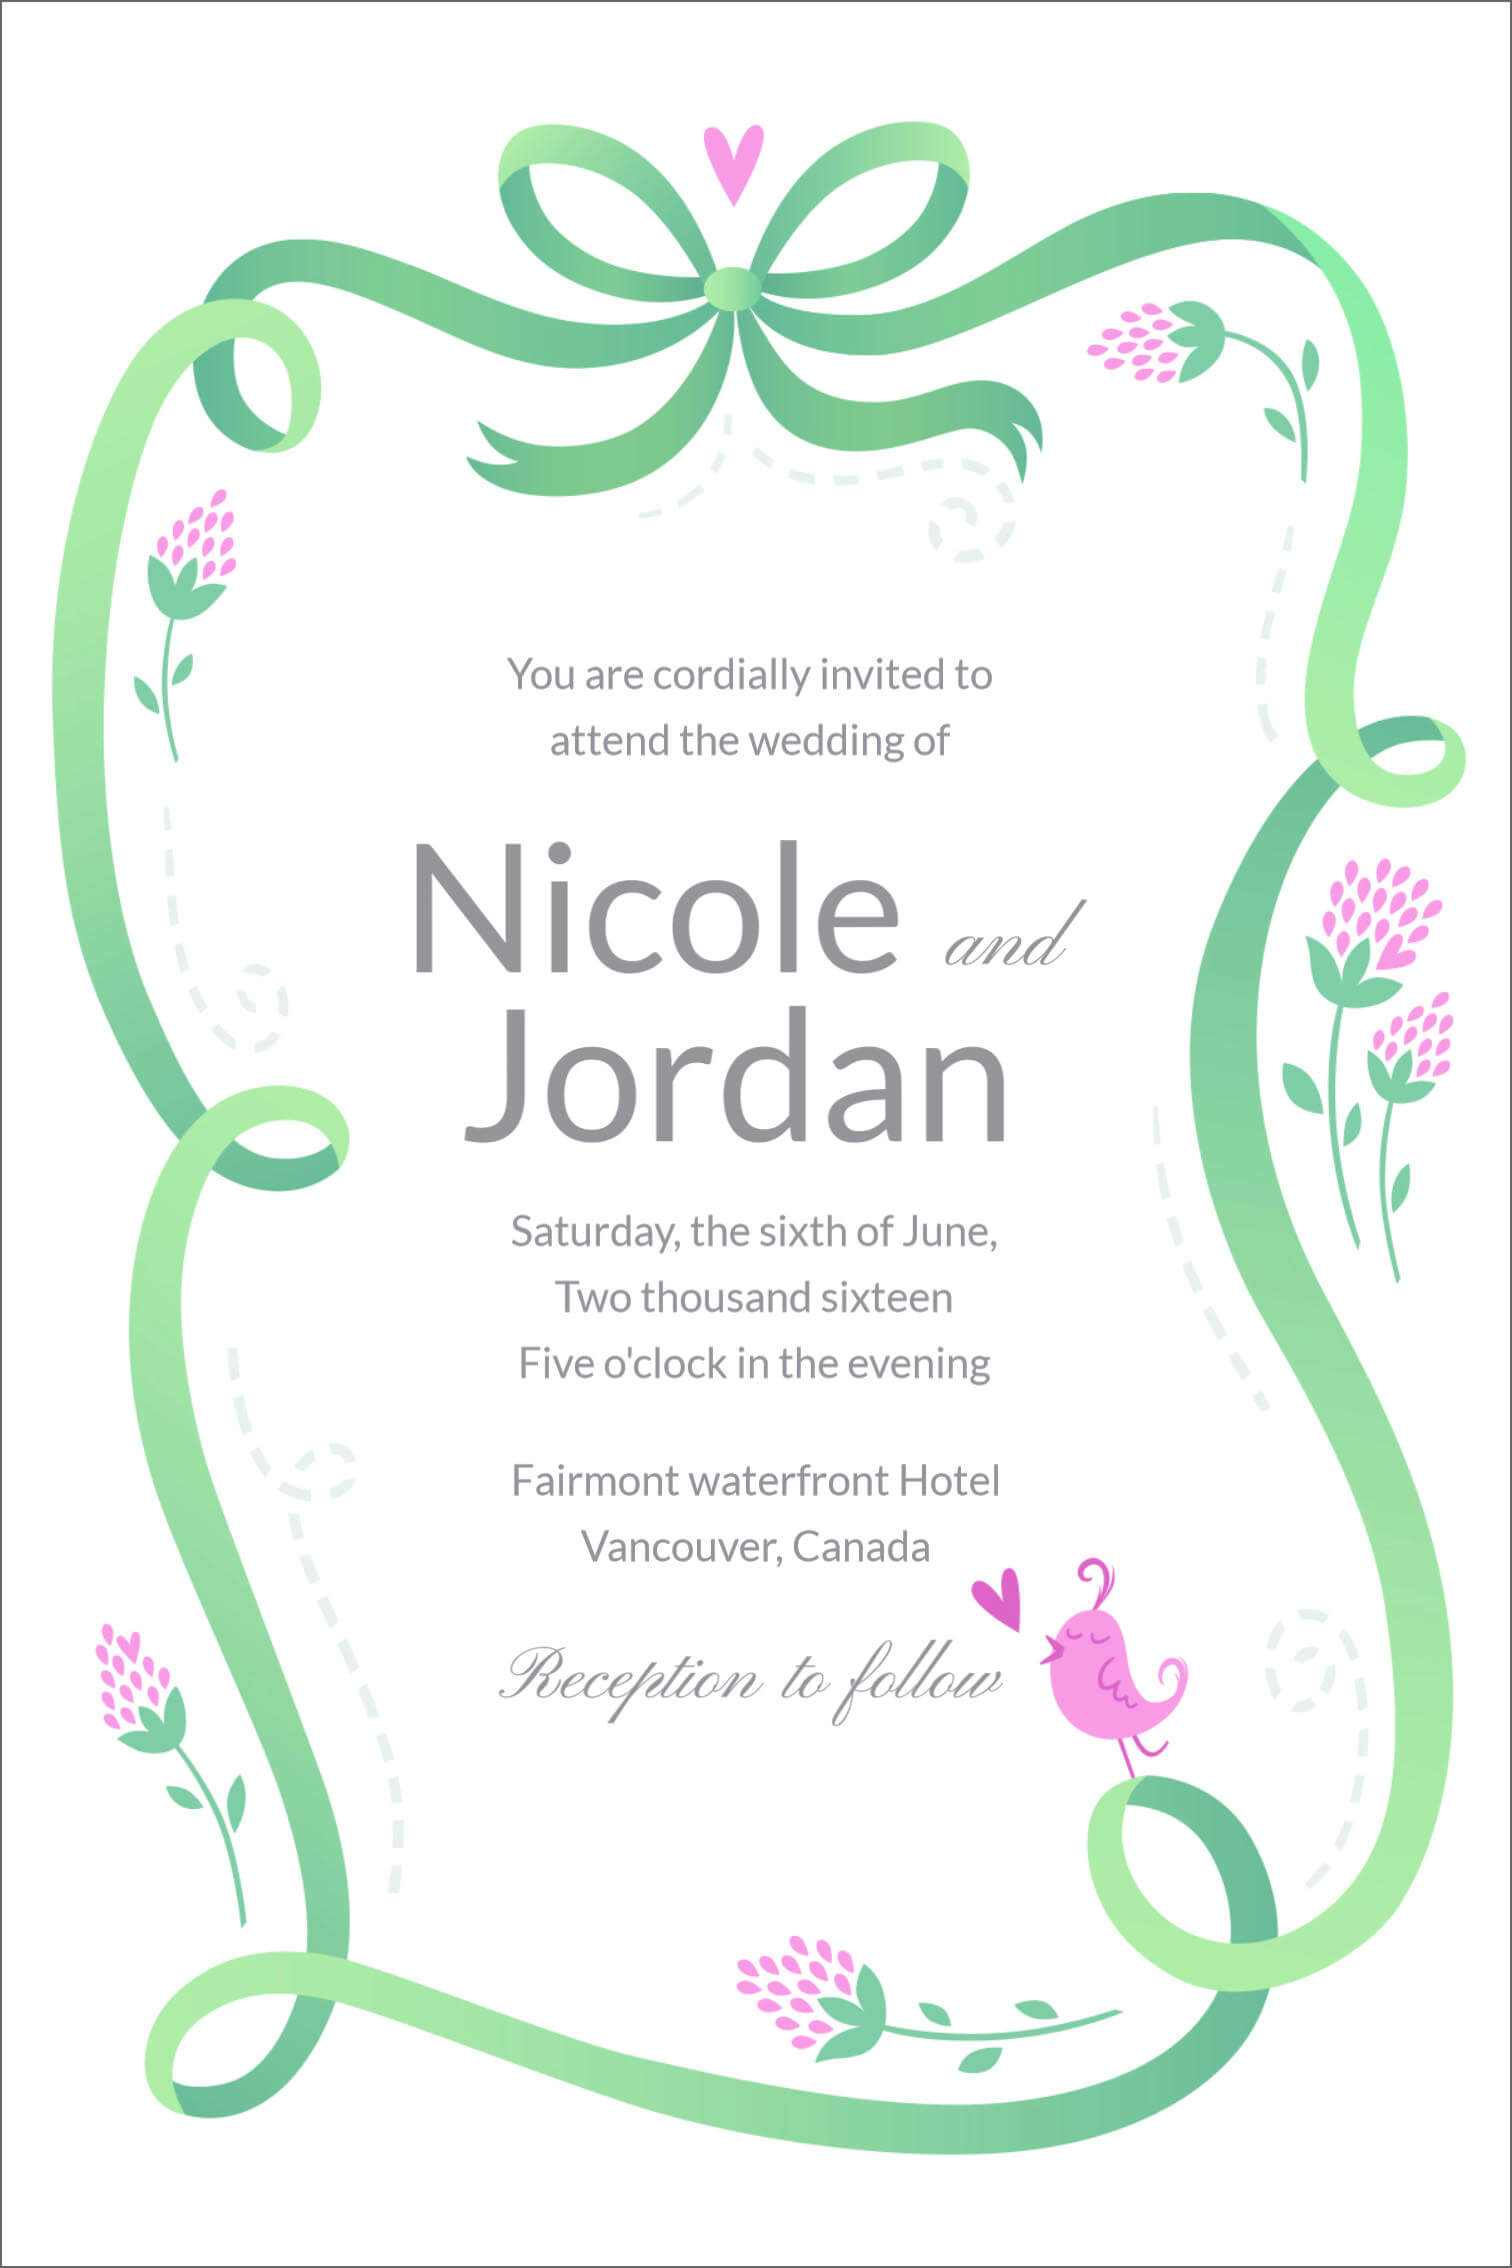 30 Free Wedding Invitation Template Cards – Printable And With Editable Social Security Card Template